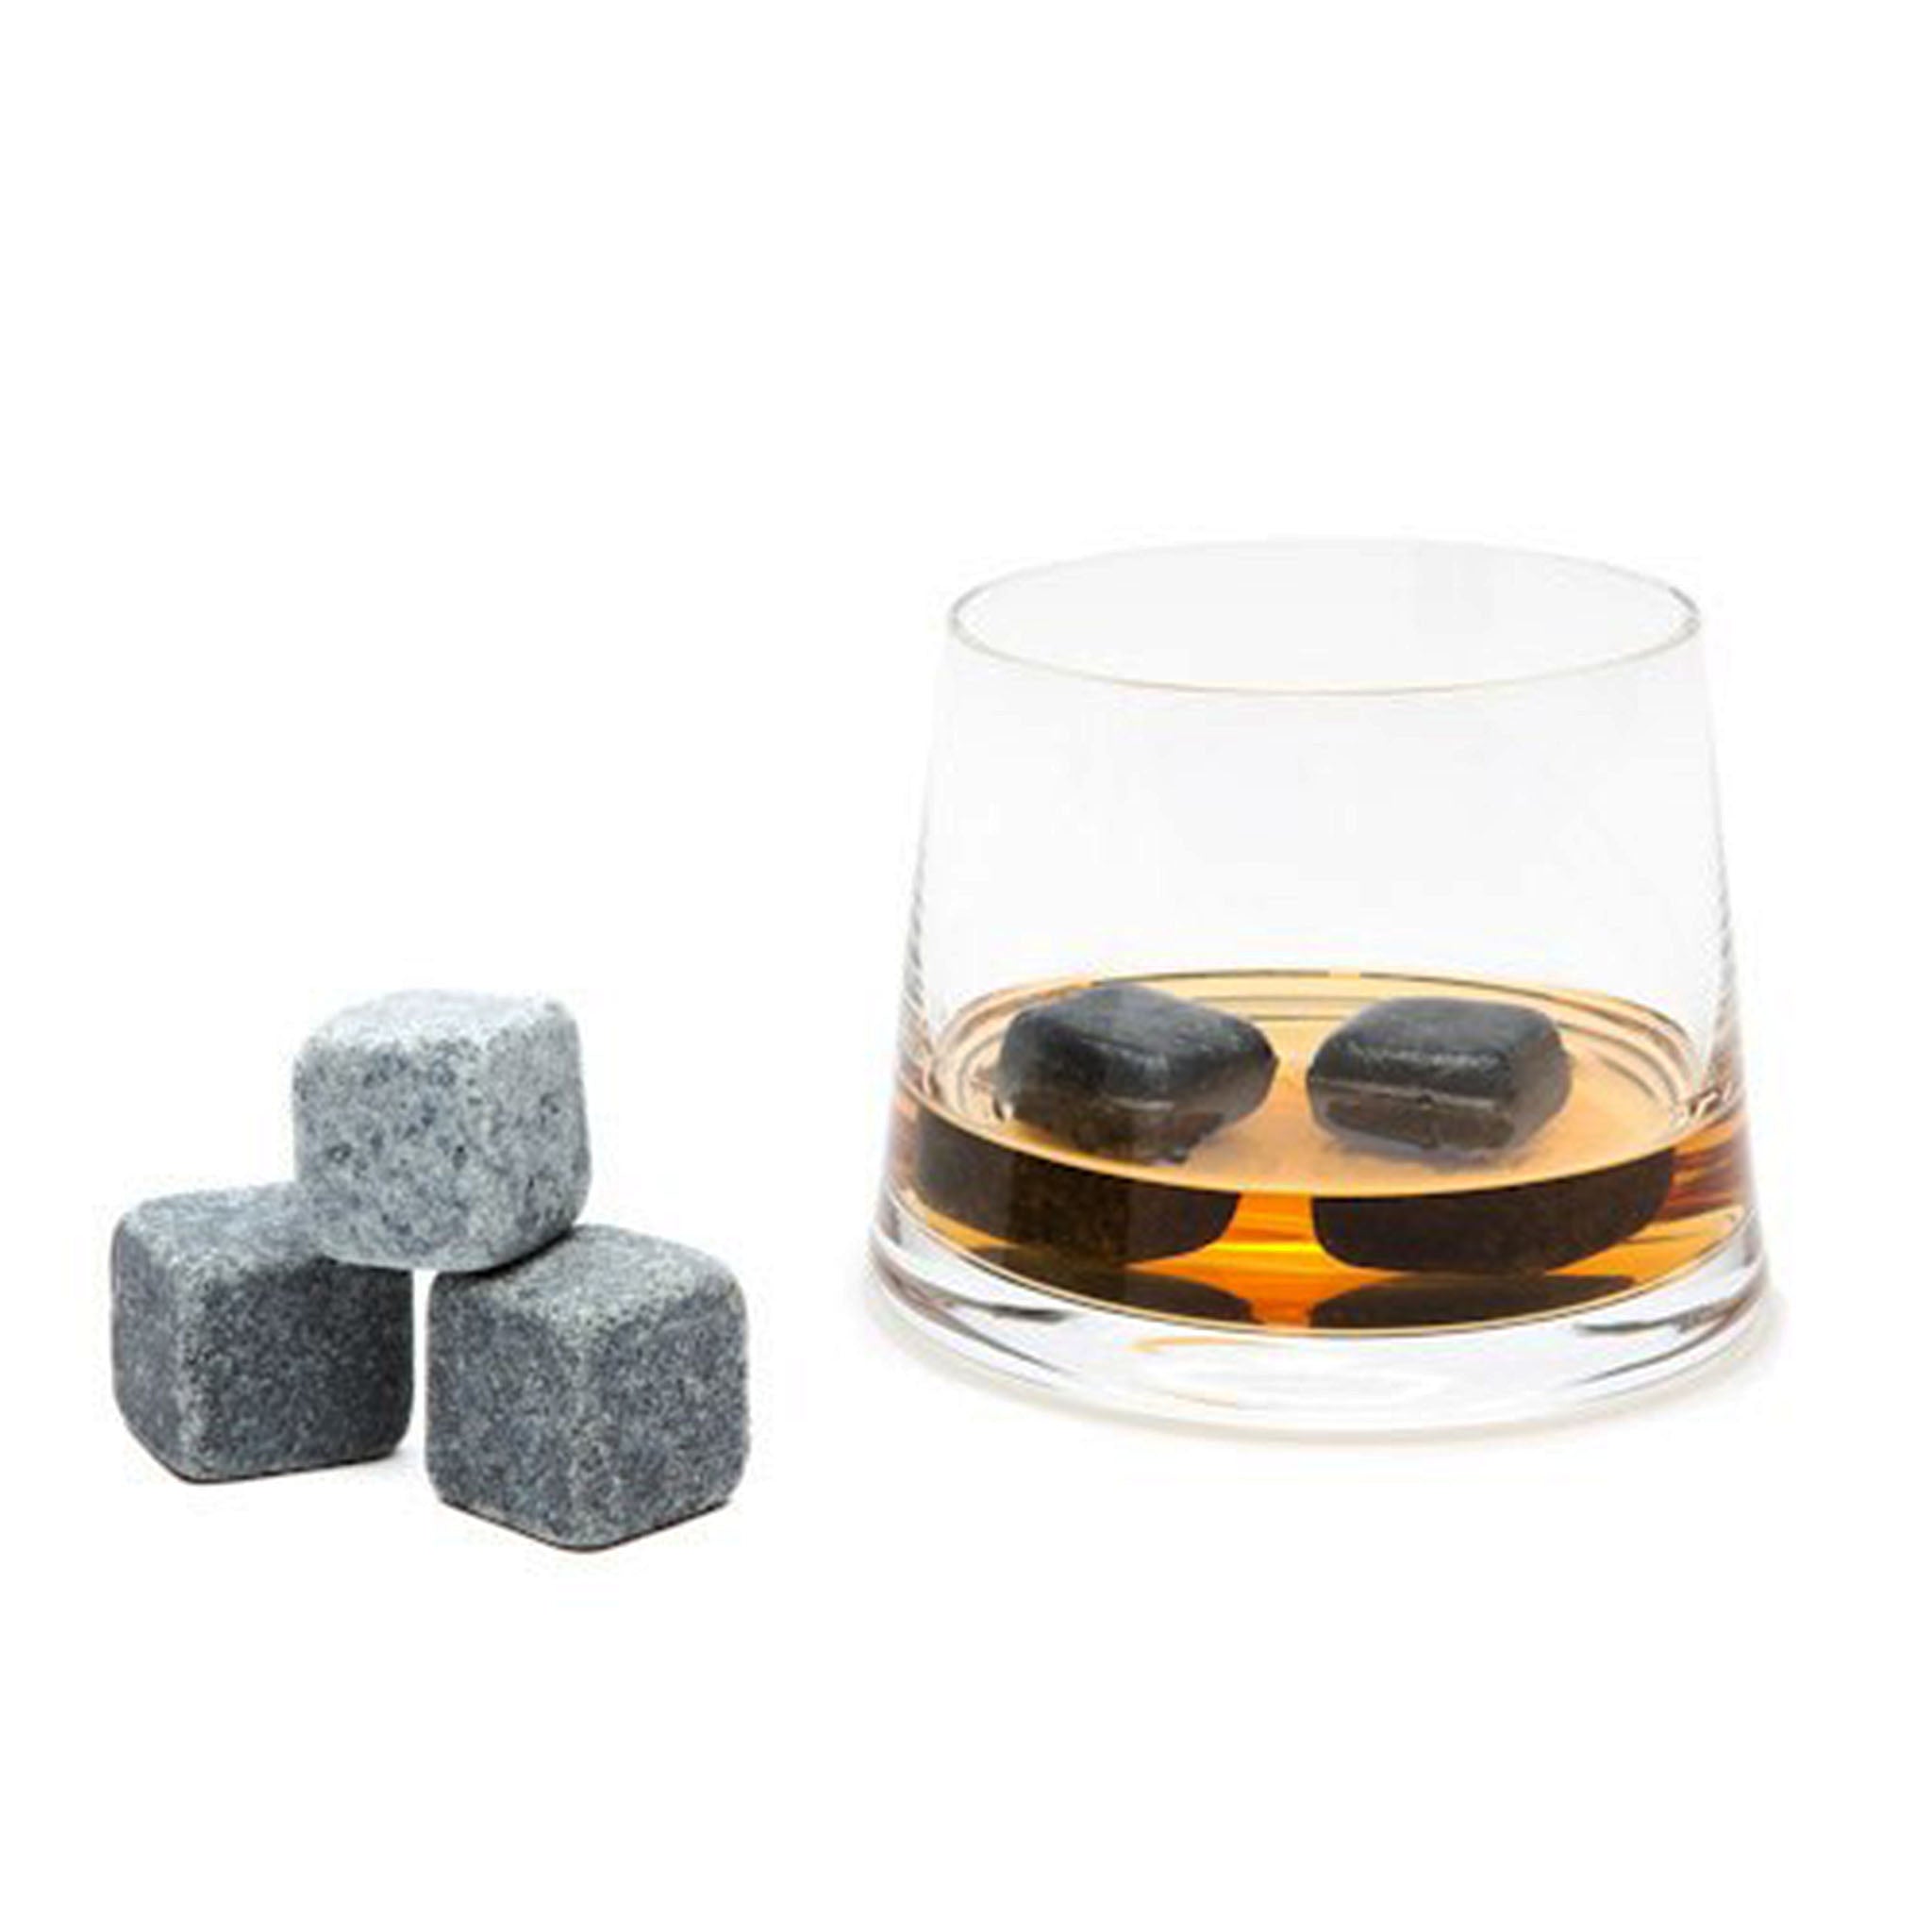 Whisky Stones by Teroforma. Soapstone cubes that cool your drink without watering it down.